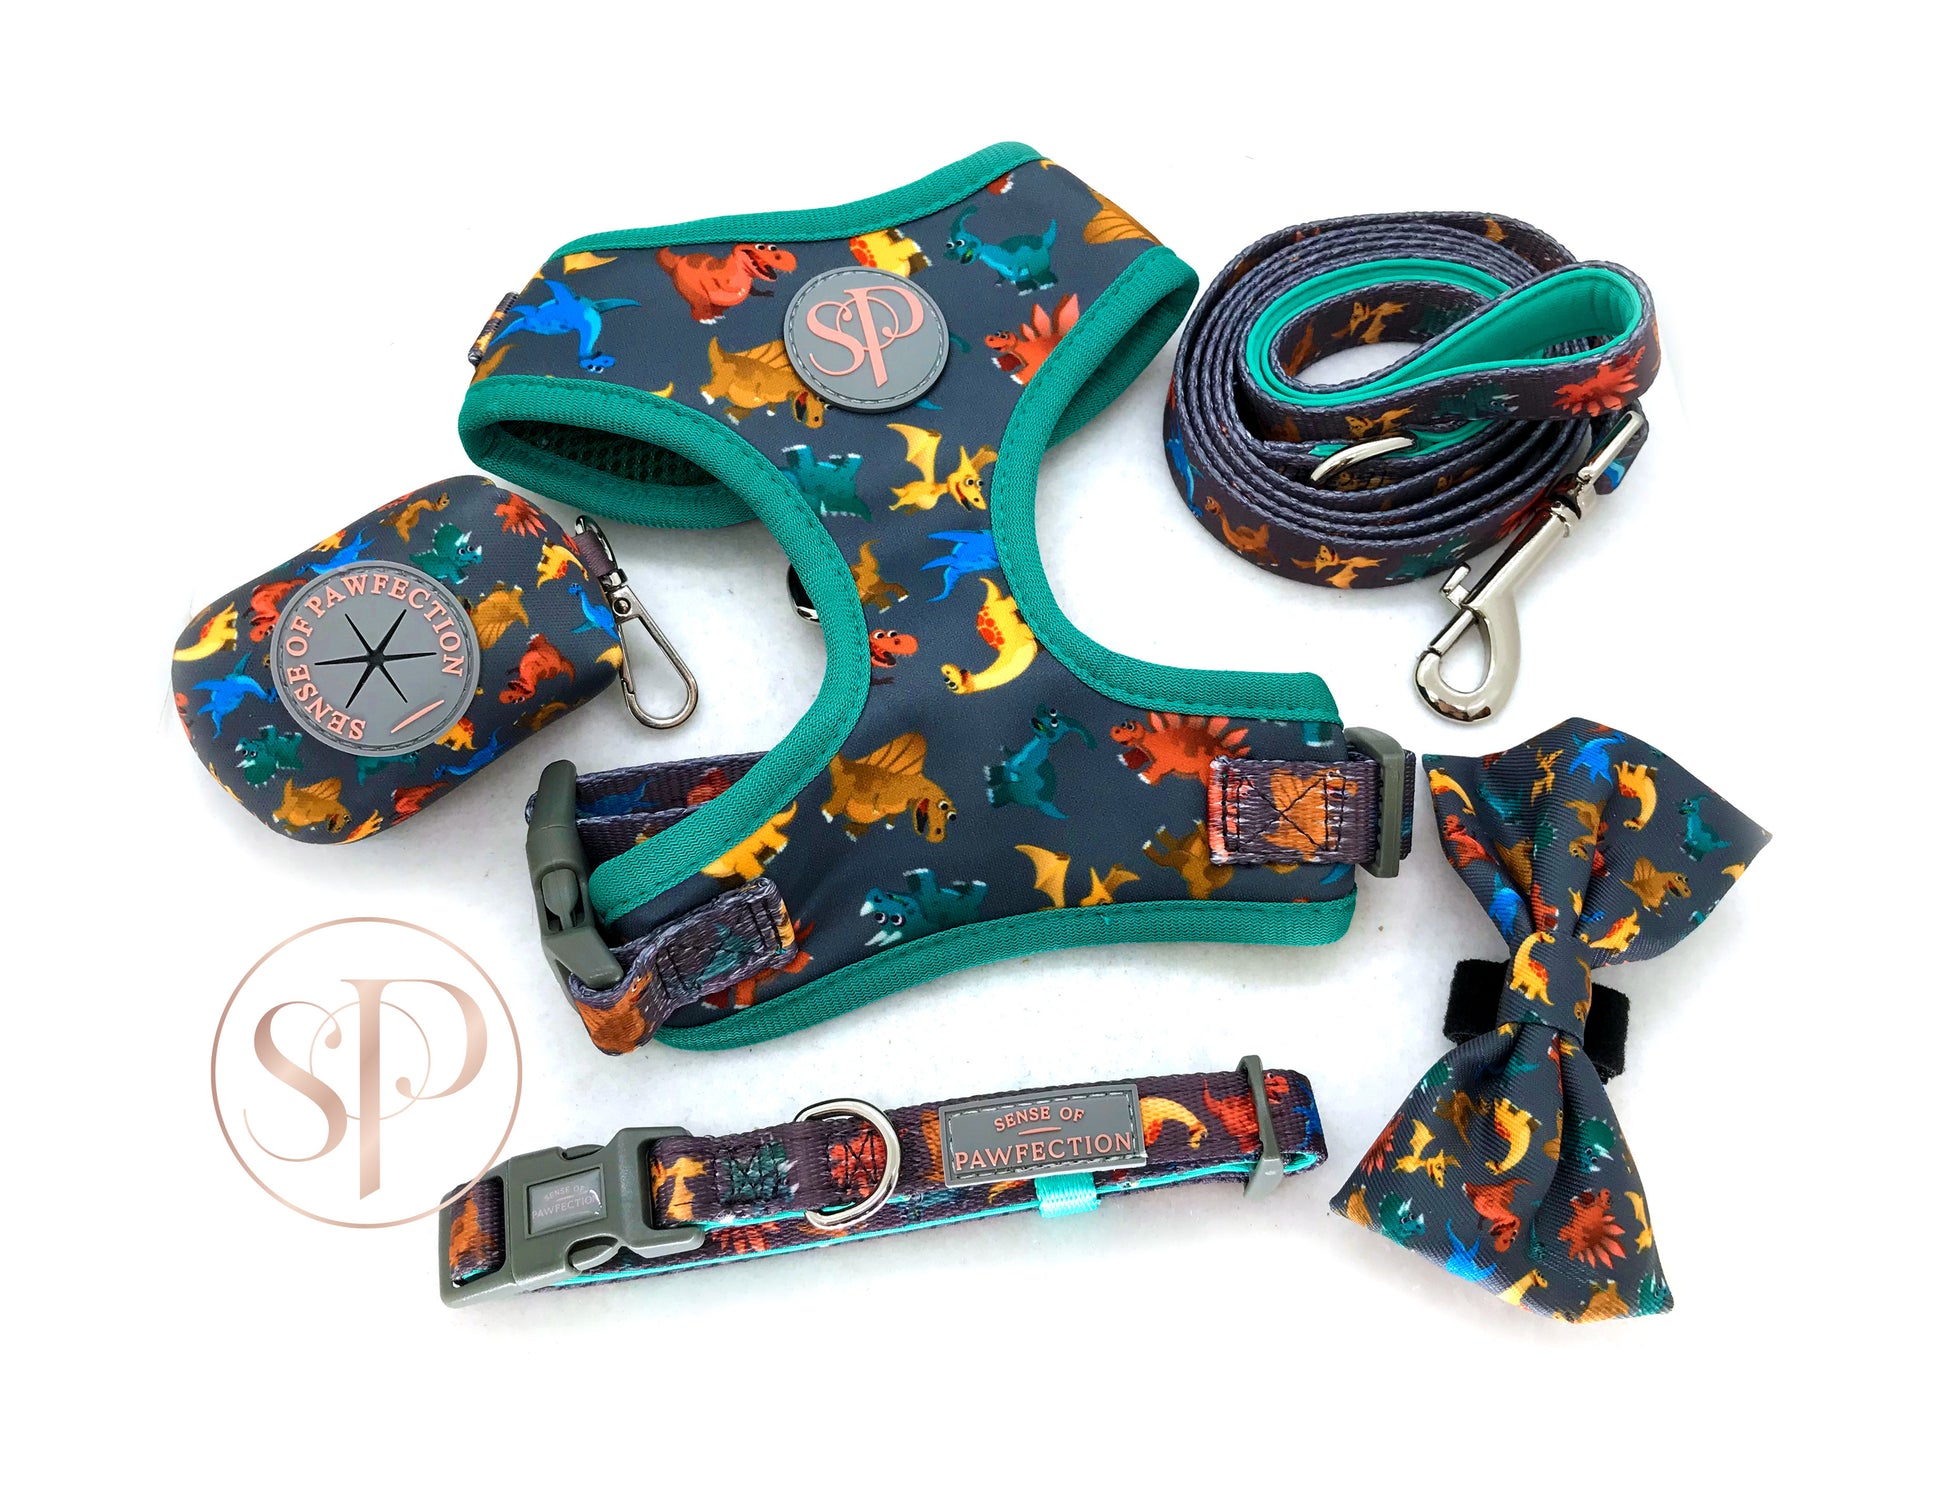 A super cute and colourful Dinosaur dog collar, lead, harness, bow tie and doggy bag holder from the Dogasaurs Collection.